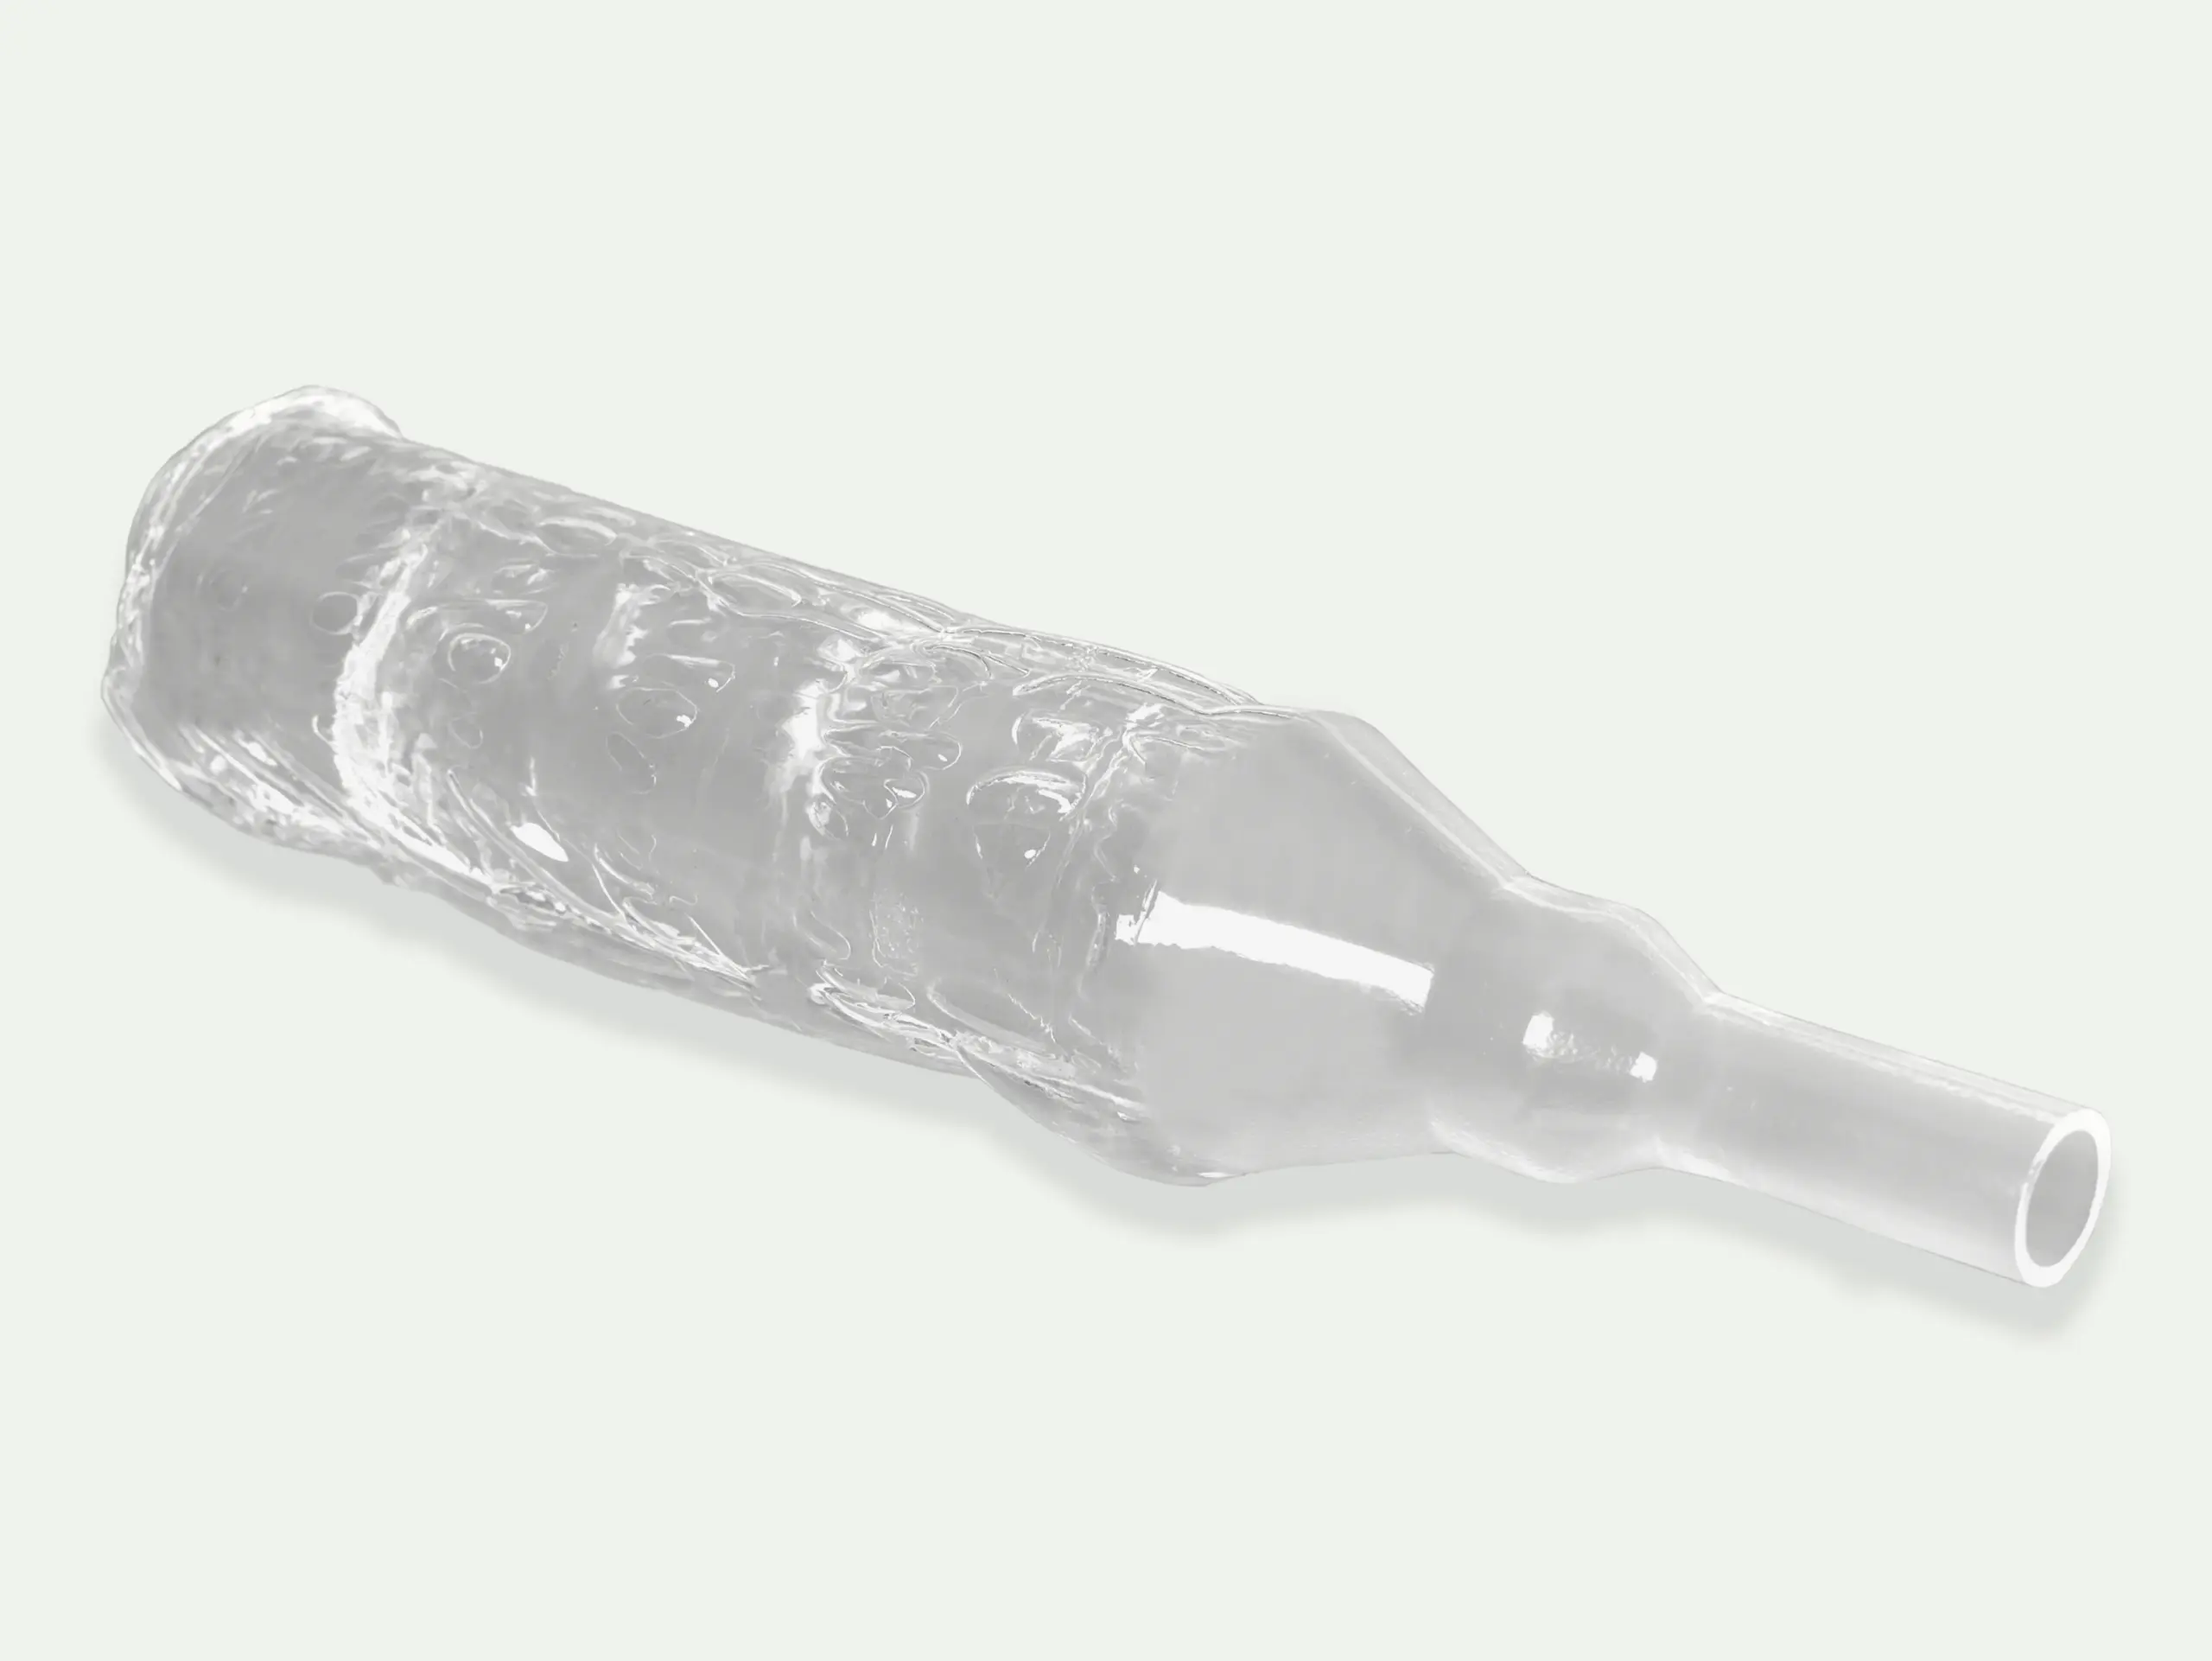 Picture of external condom catheter closeup, wideband by BD and Bard from RA Fischer.[ Personalized urology care ]